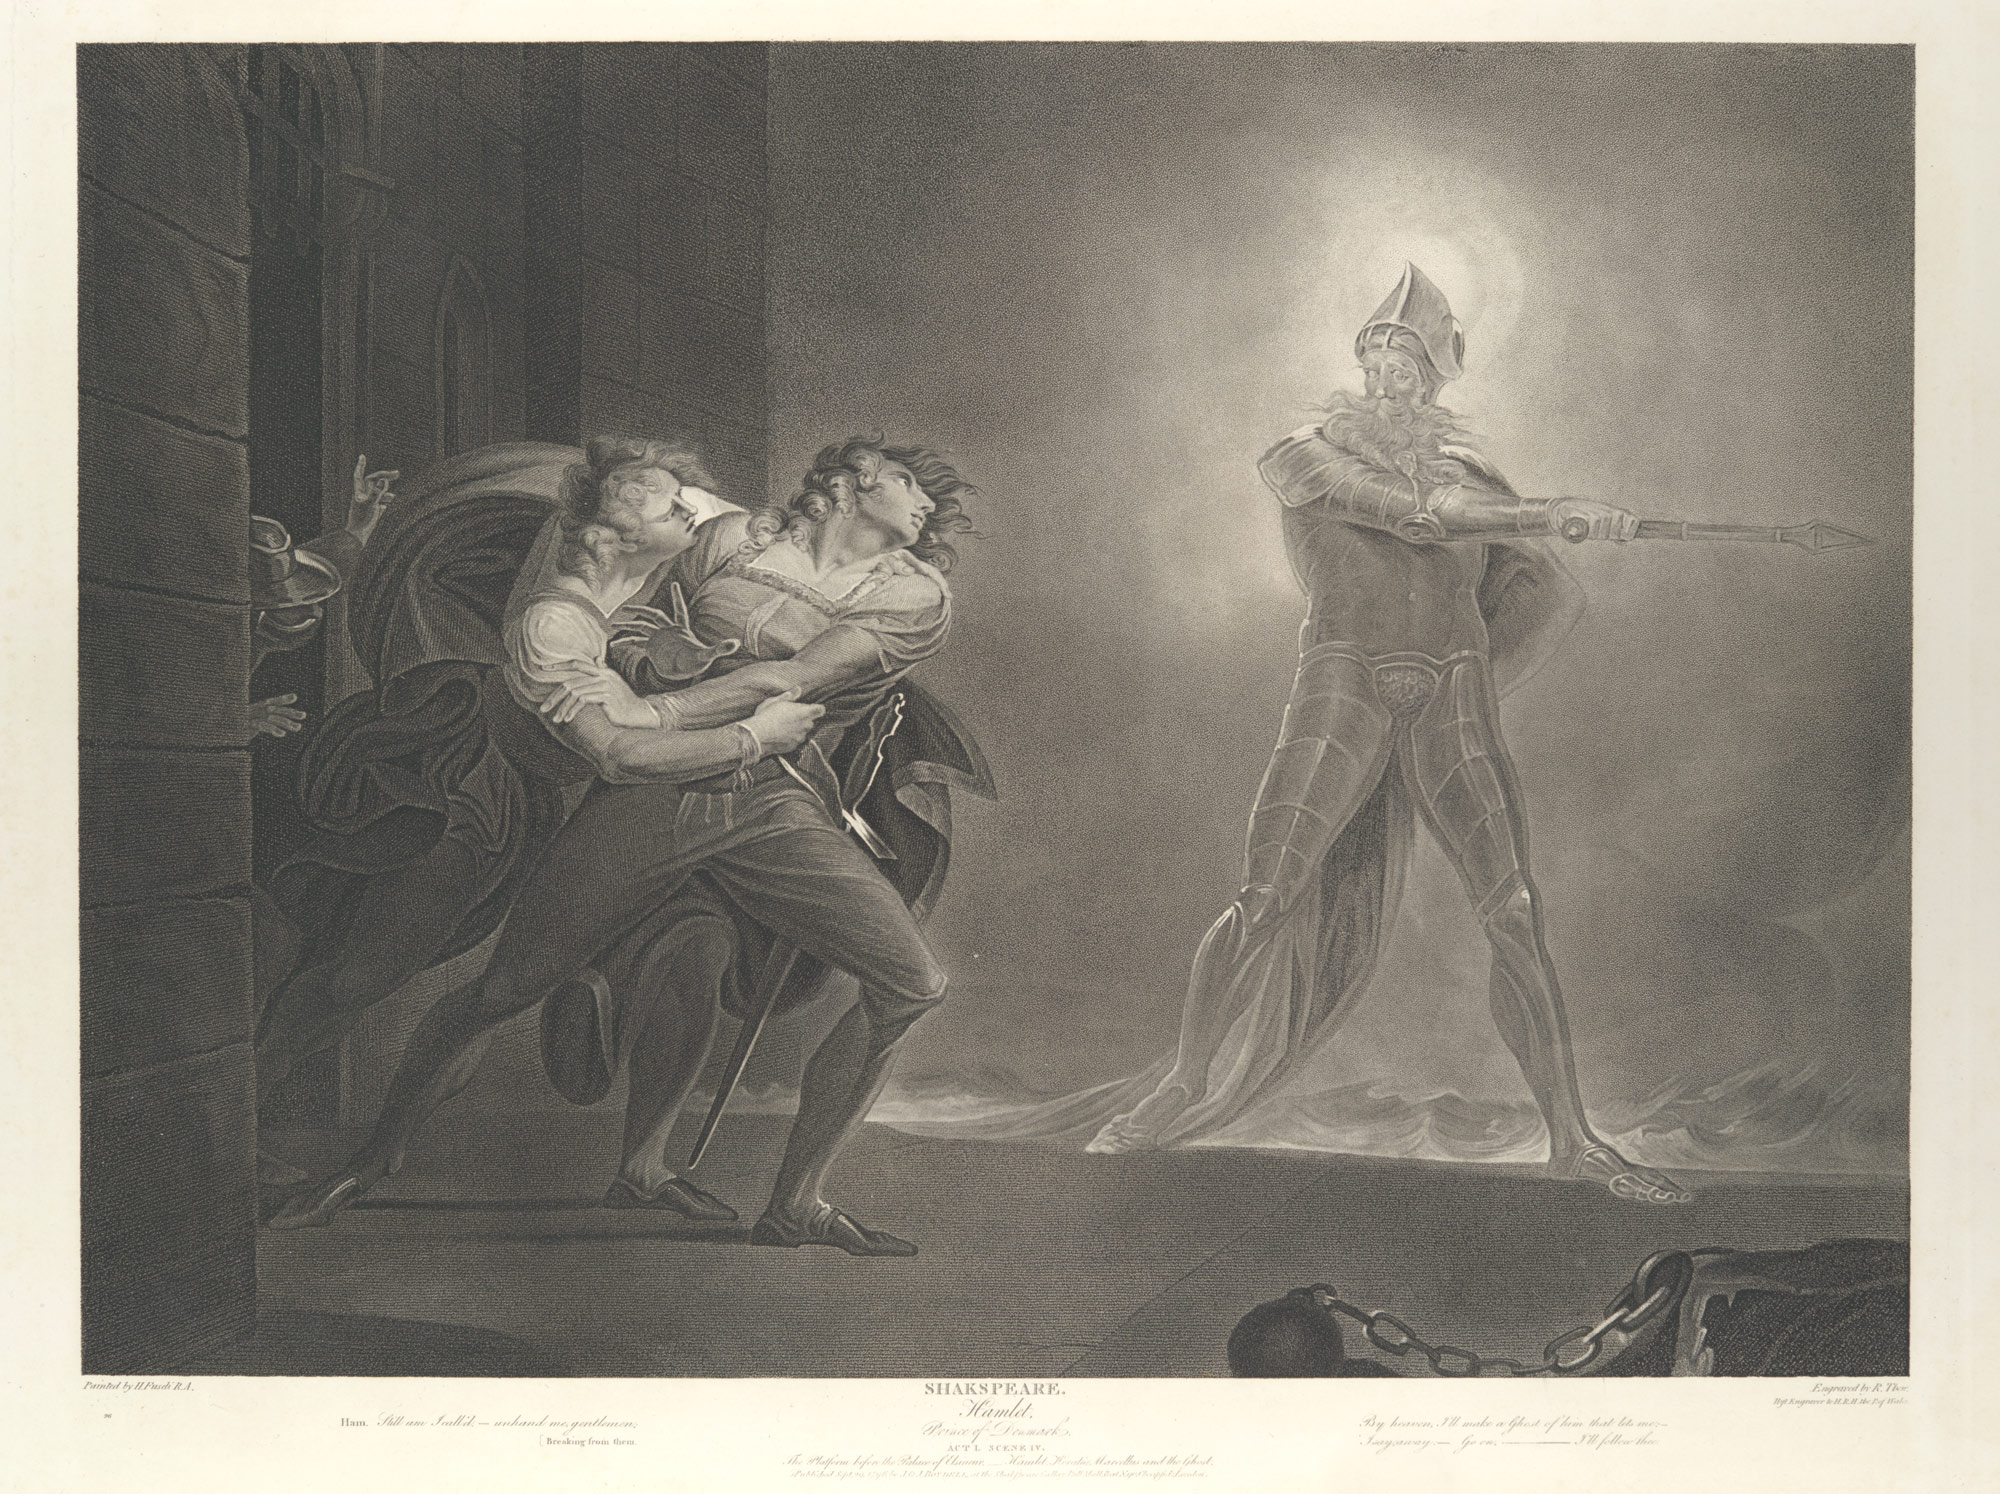 engraving of Hamlet and the ghost